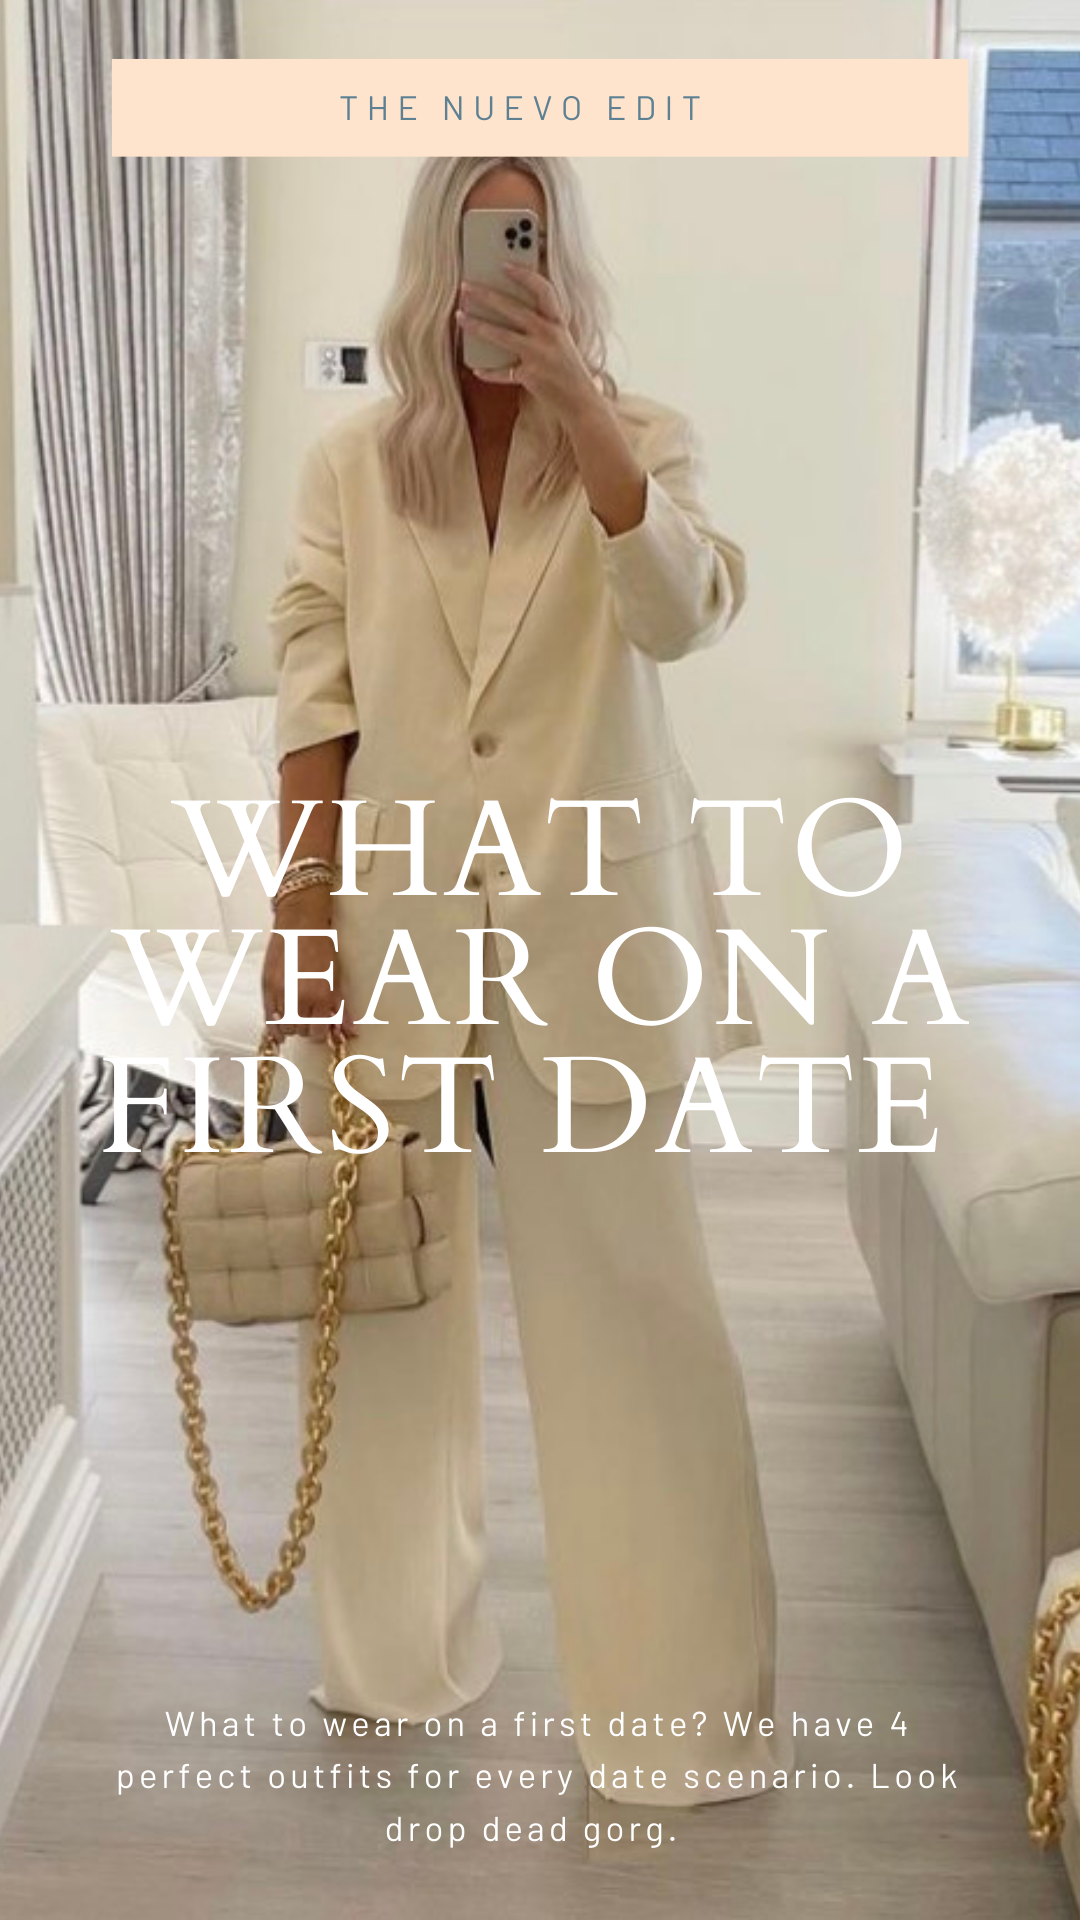 What to wear on a first date (or any date!)